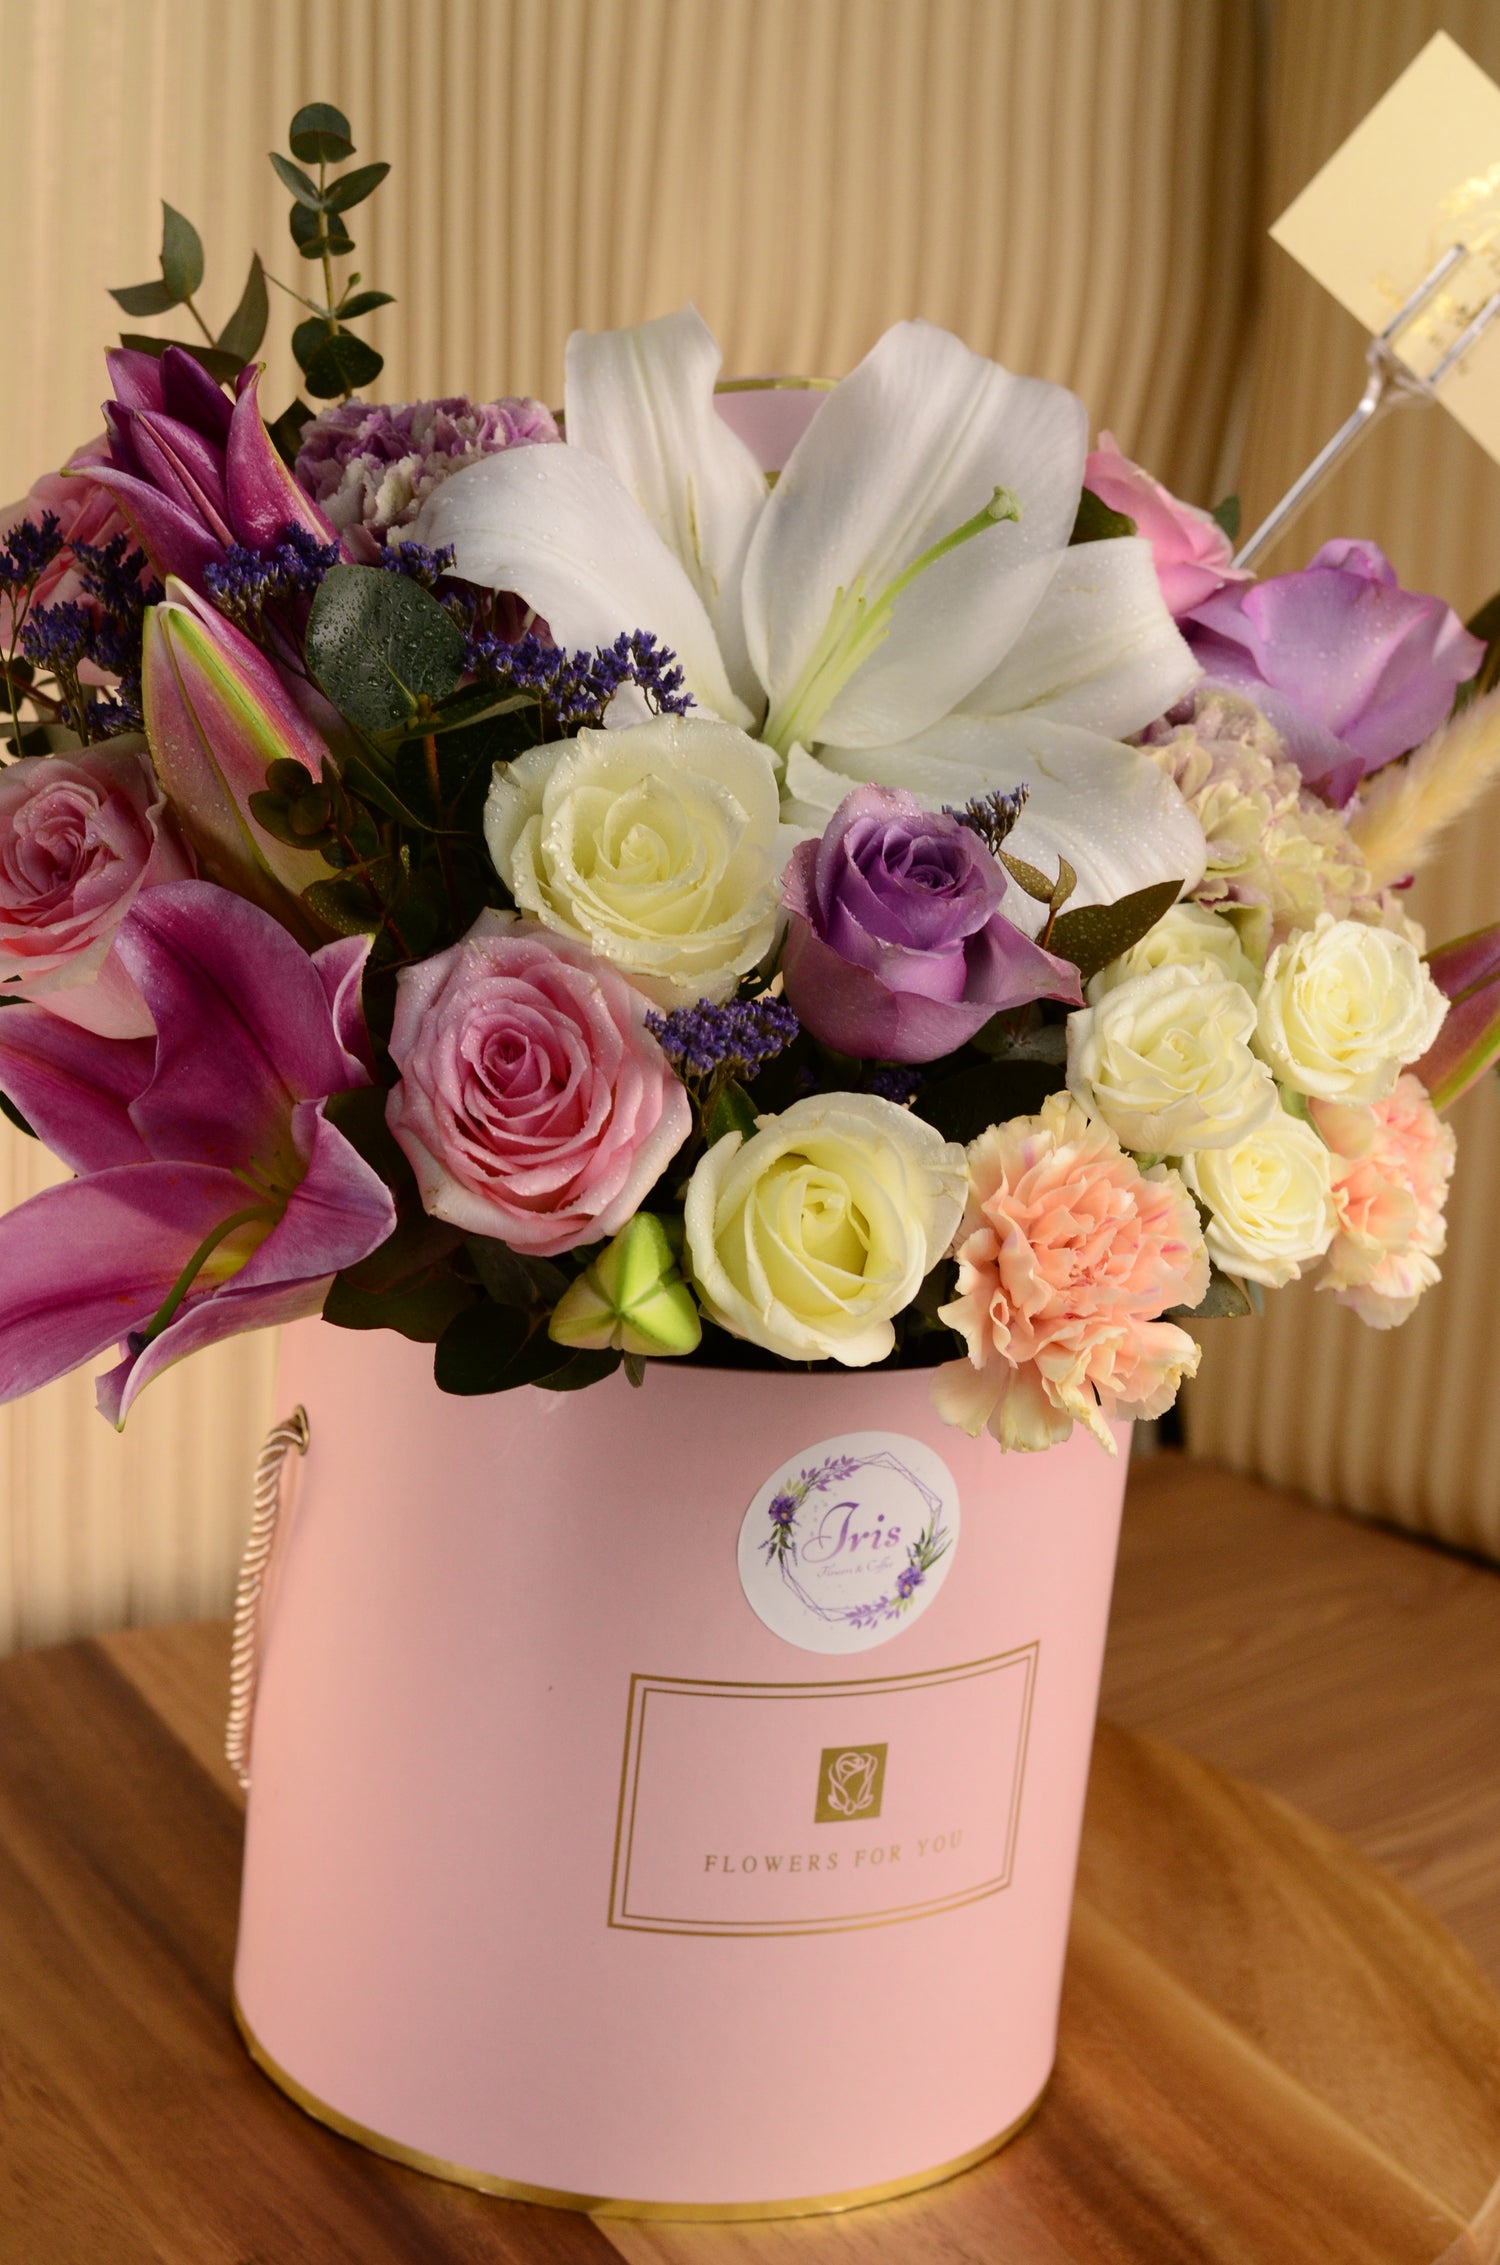 pink & Lily flowers box